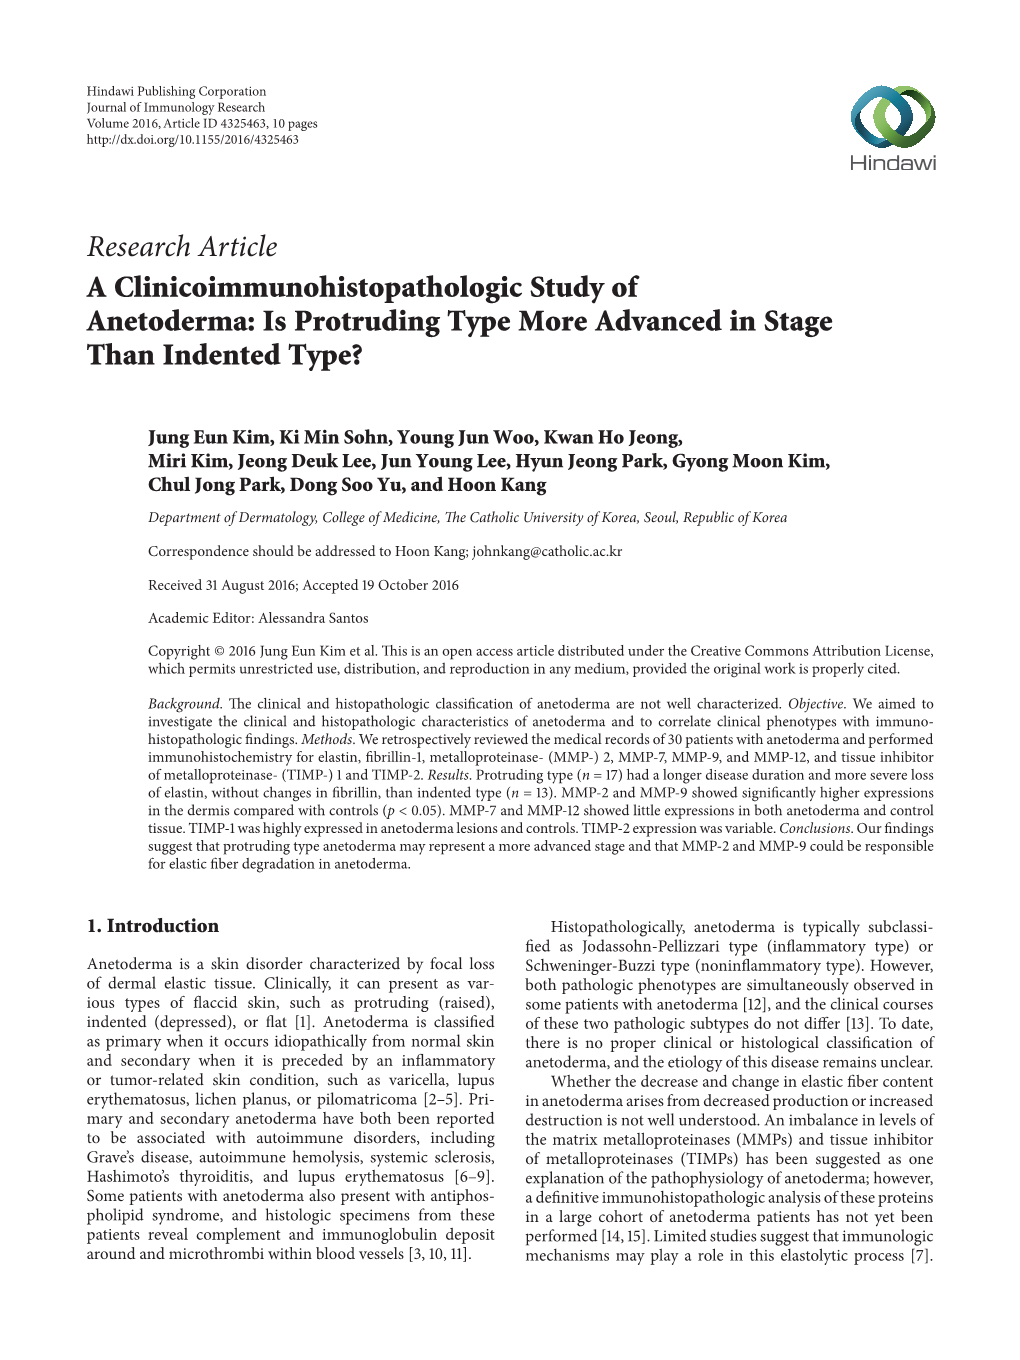 A Clinicoimmunohistopathologic Study of Anetoderma: Is Protruding Type More Advanced in Stage Than Indented Type?